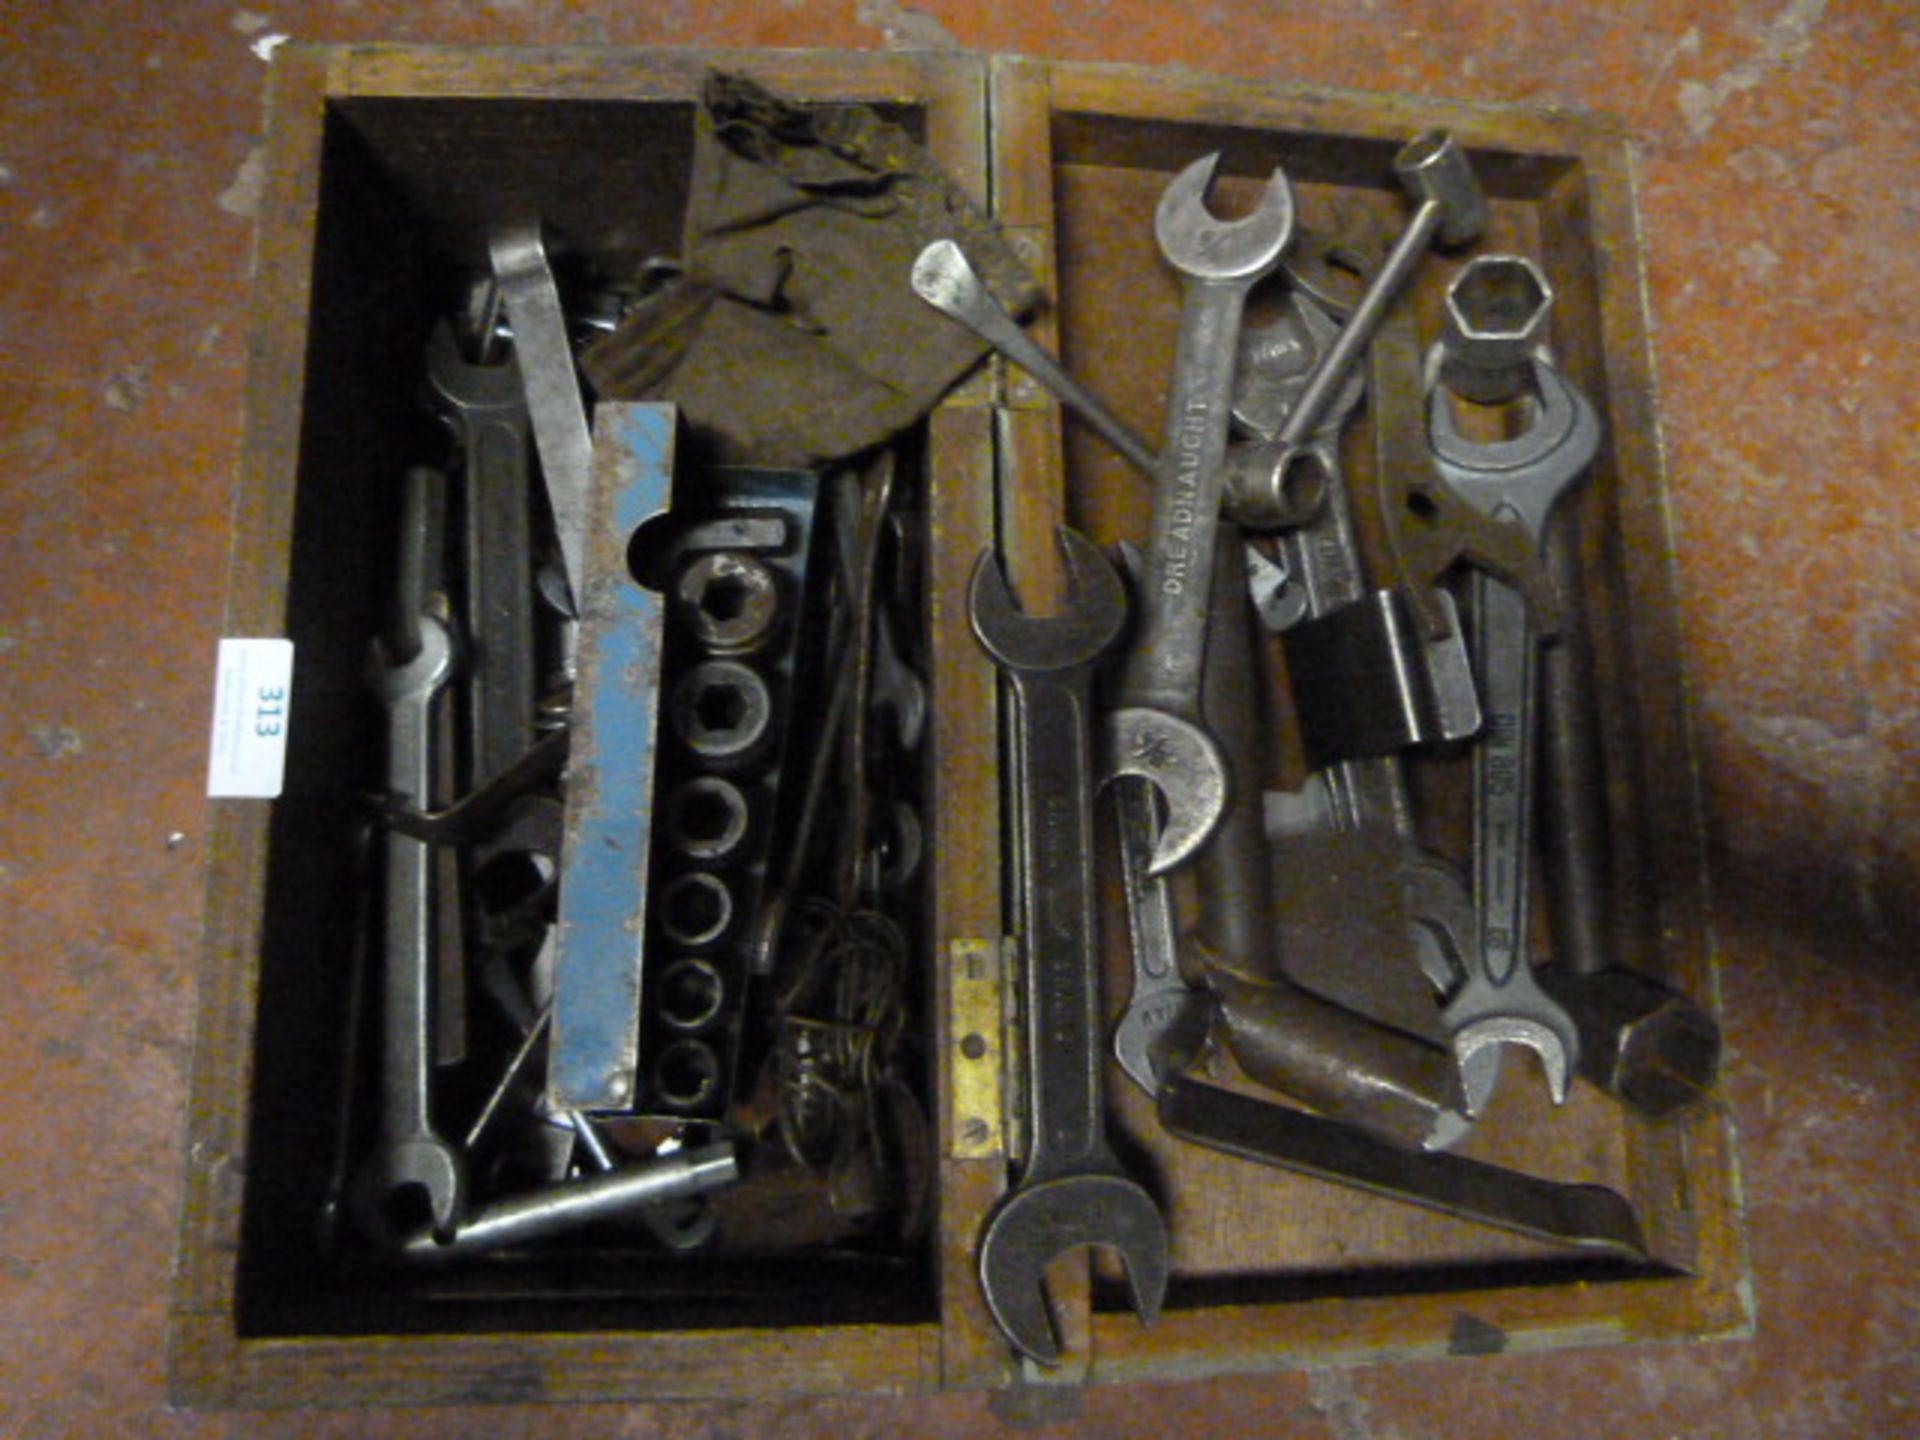 Small Pine Box Containing Spanners